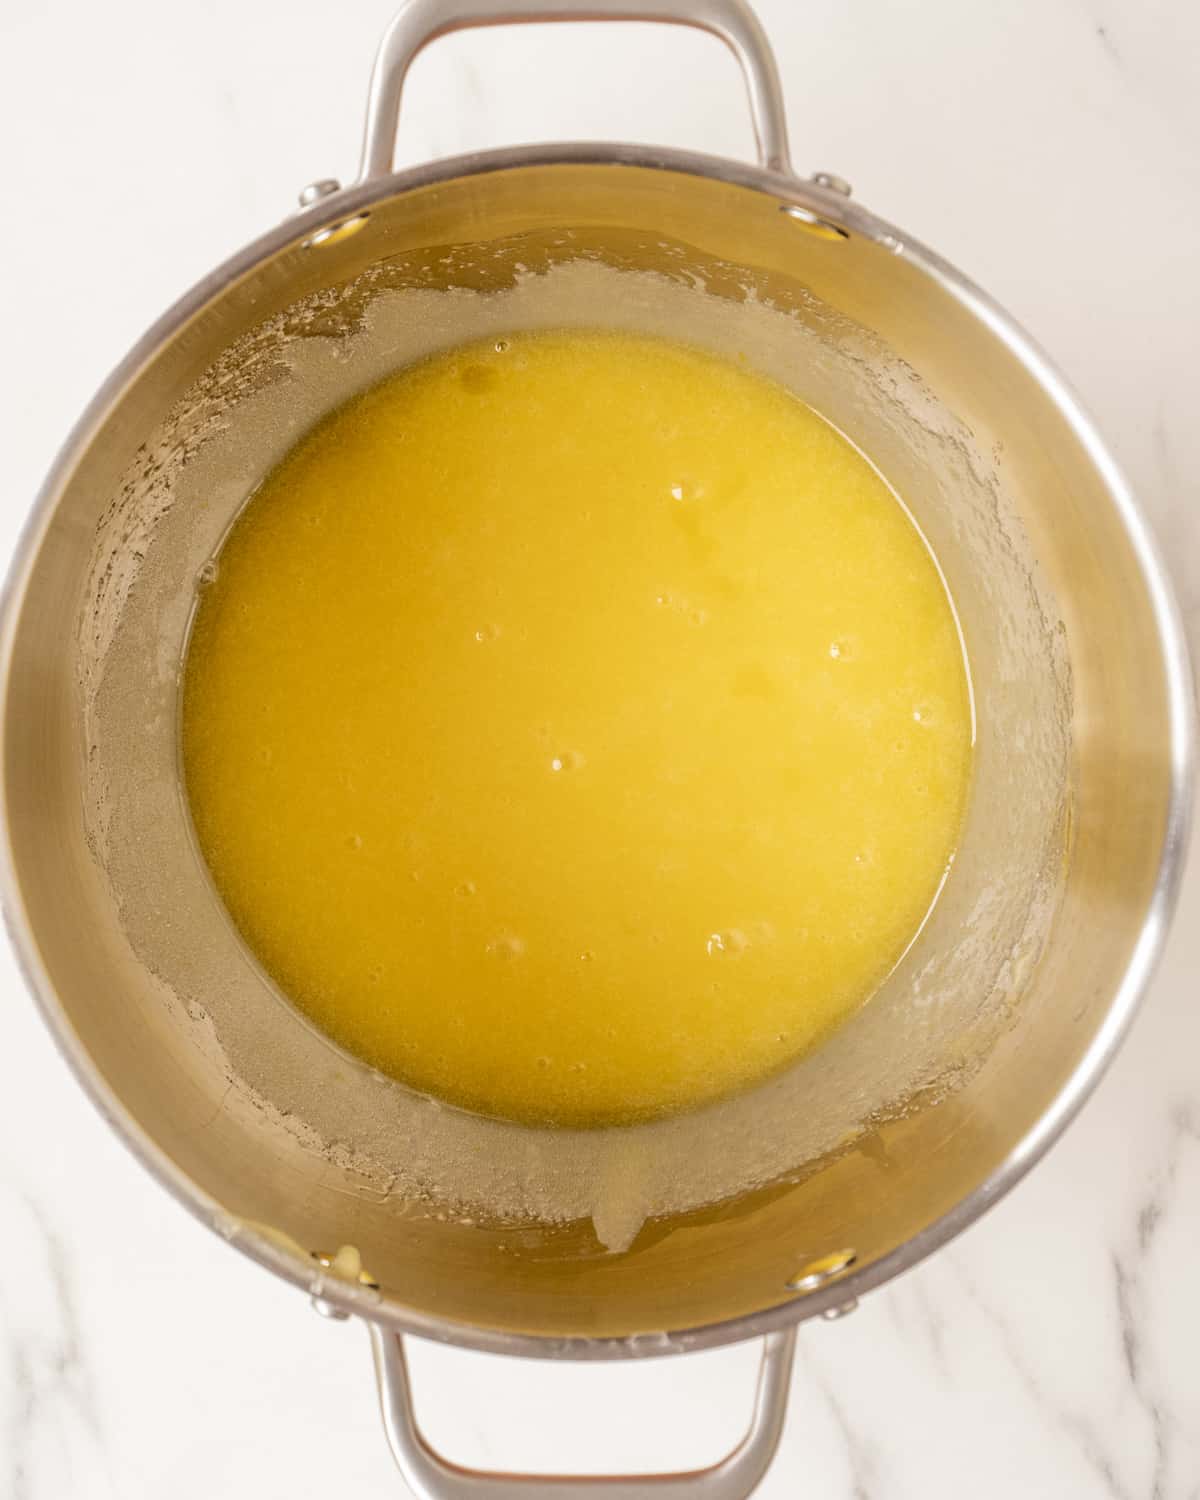 A stand mixer bowl with a mixture of oil, eggs and sugar